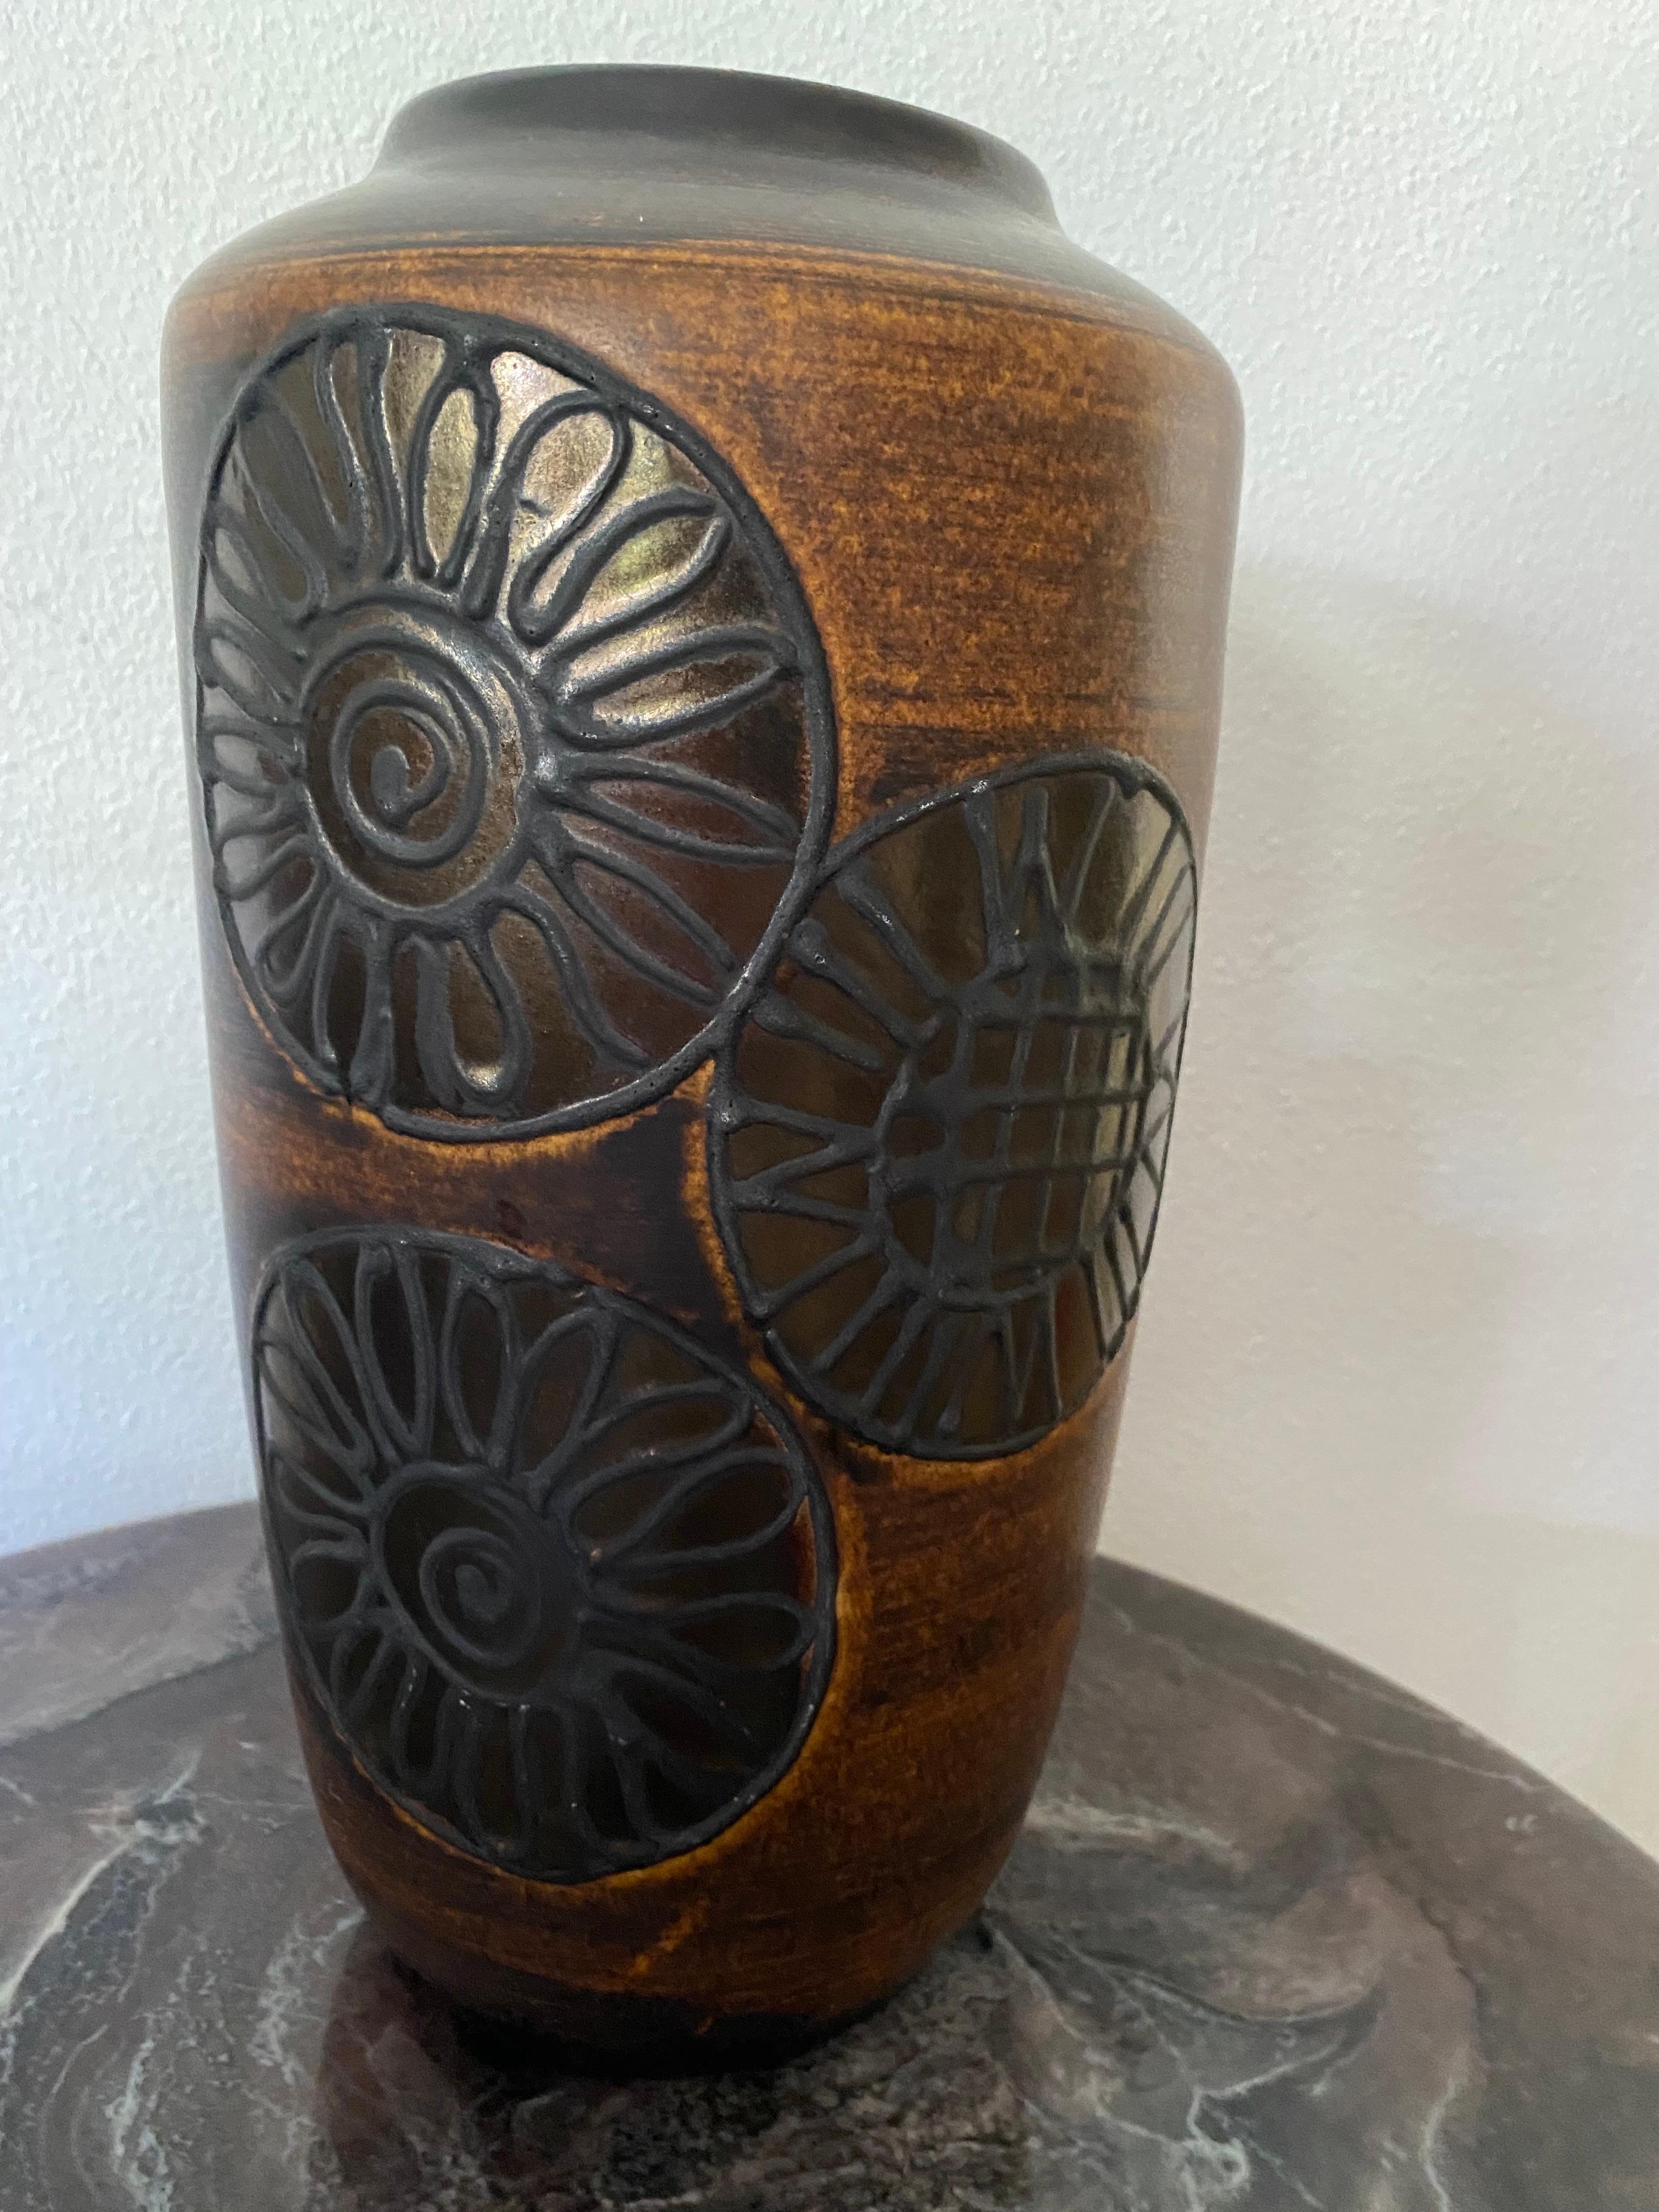 A sought after Fat Lava vase by Scheurich Keramik. The stunning vase is hugh and to my opinion, it shouldn’t be used as a vase but more as a sculpture. 

